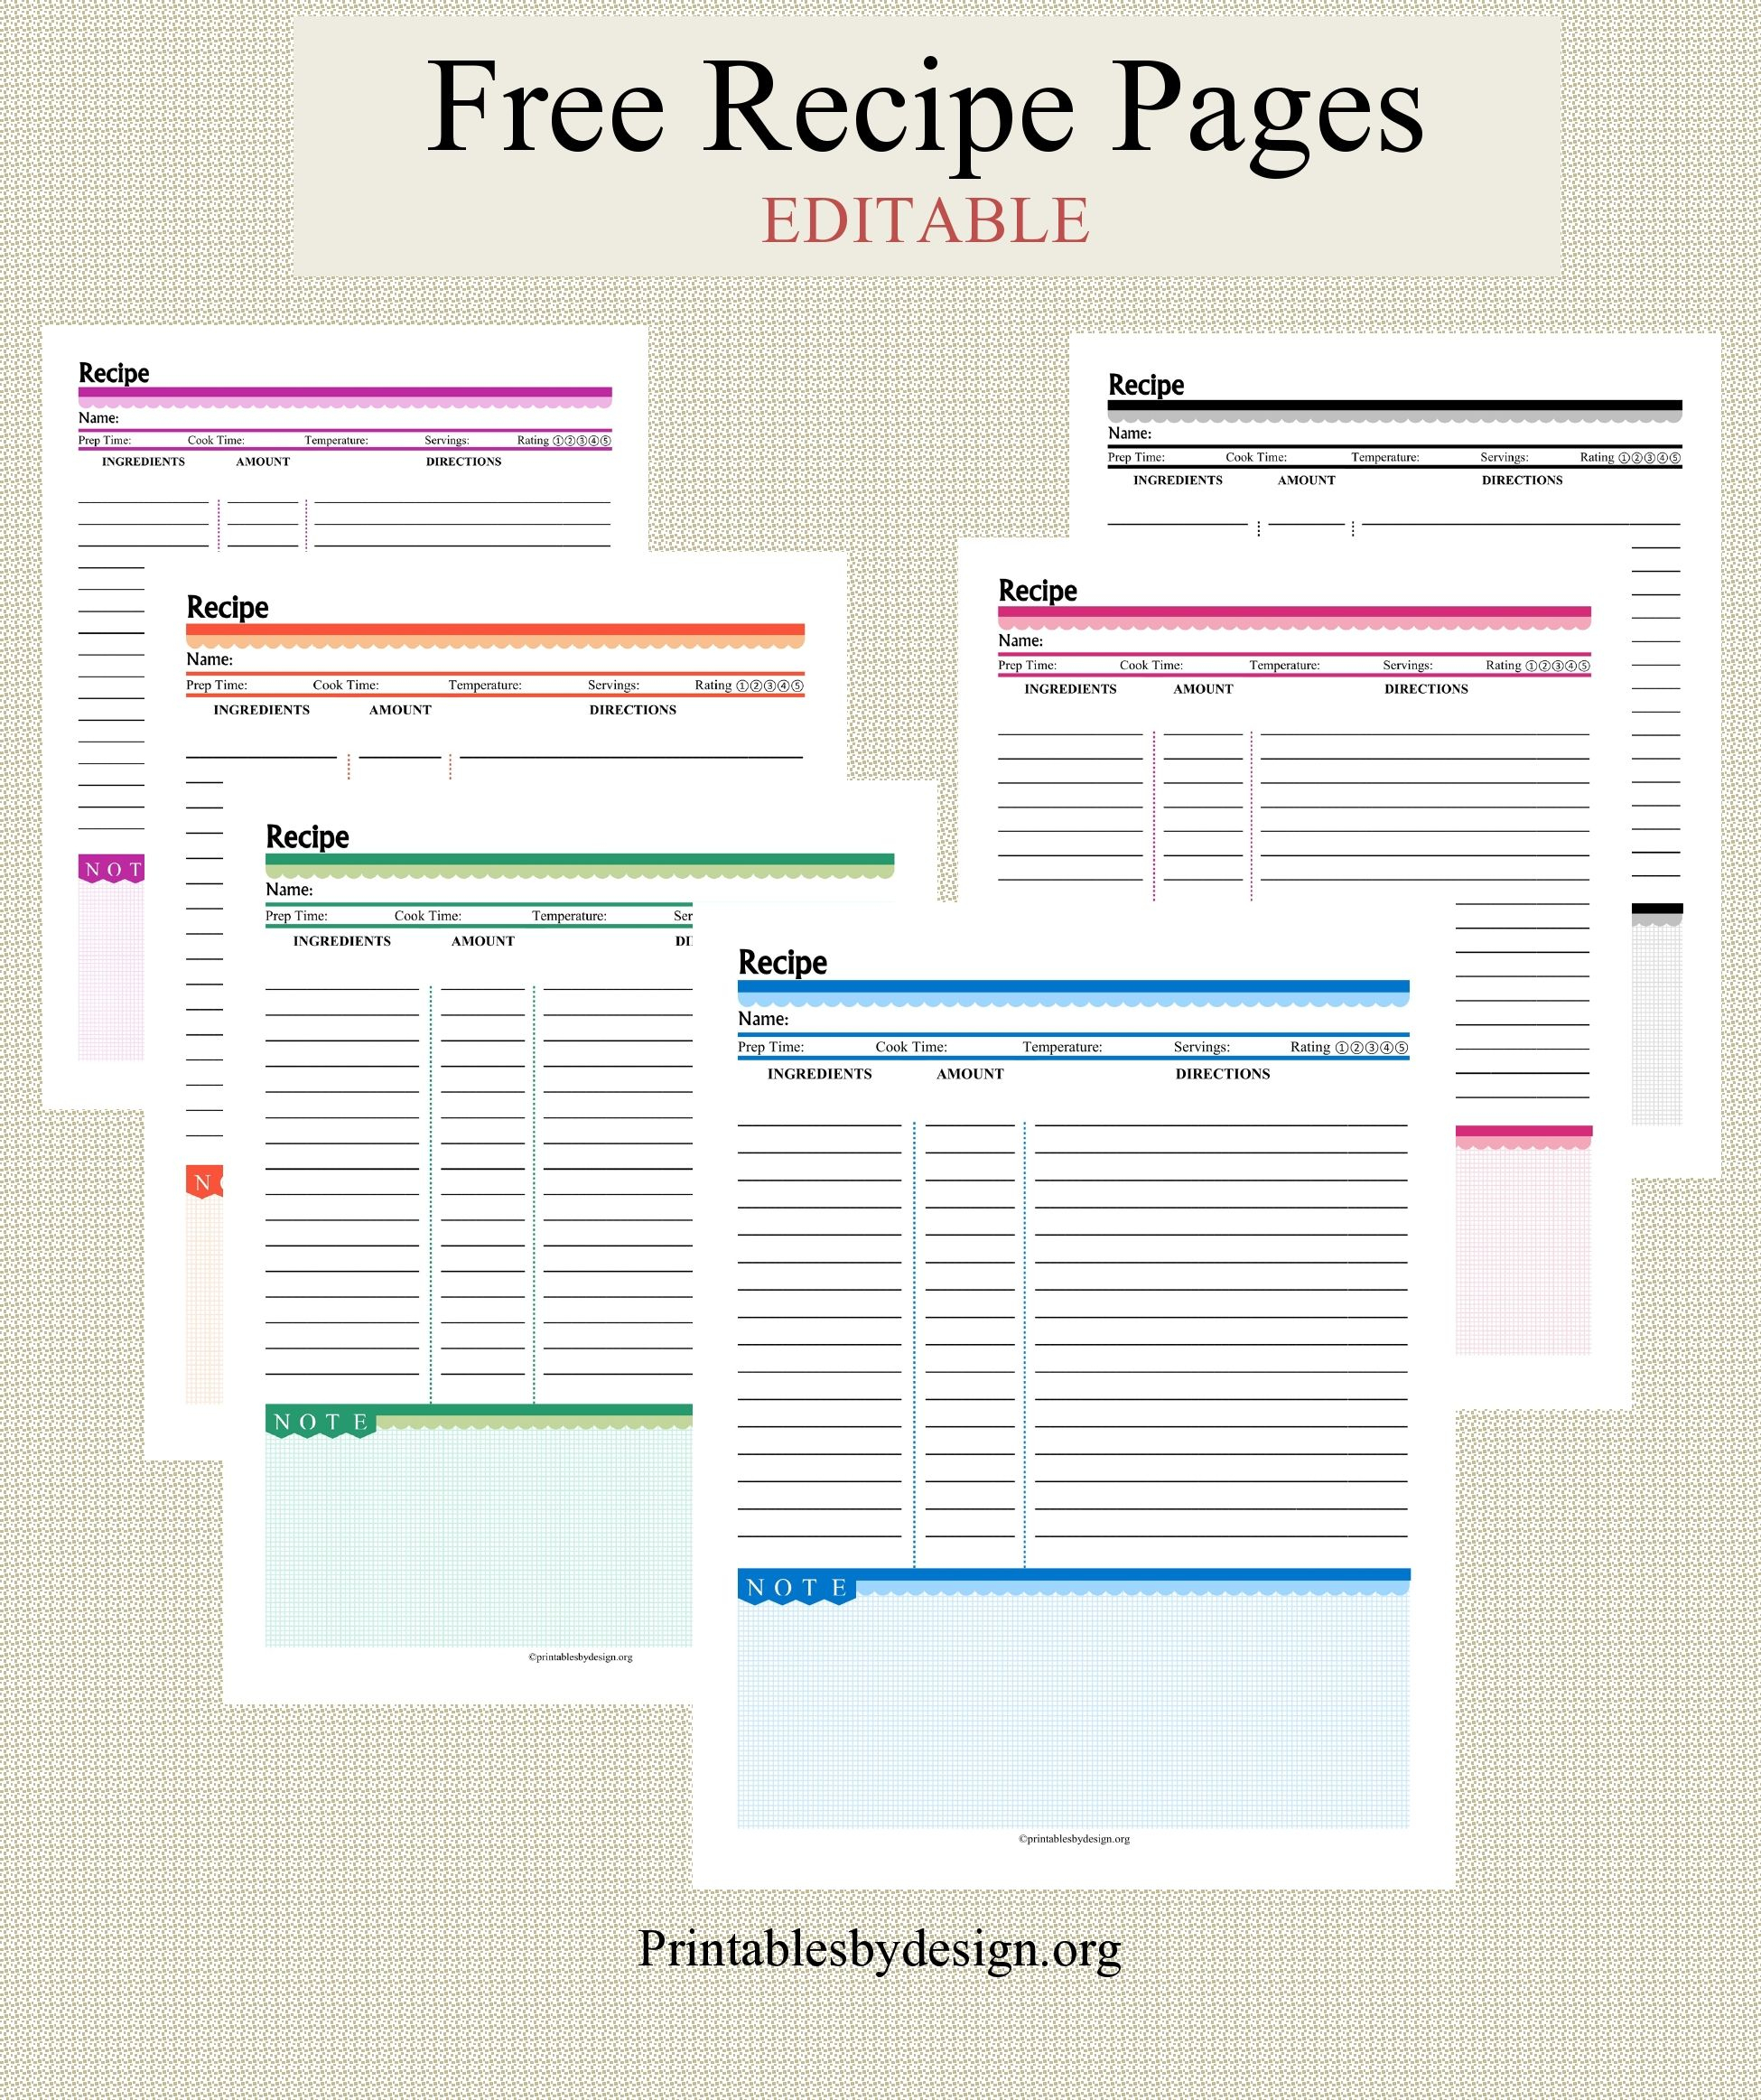 Free Recipe Pages In 6 Colors To Choose From. Editable. | Recipe - Free Printable Recipe Page Template